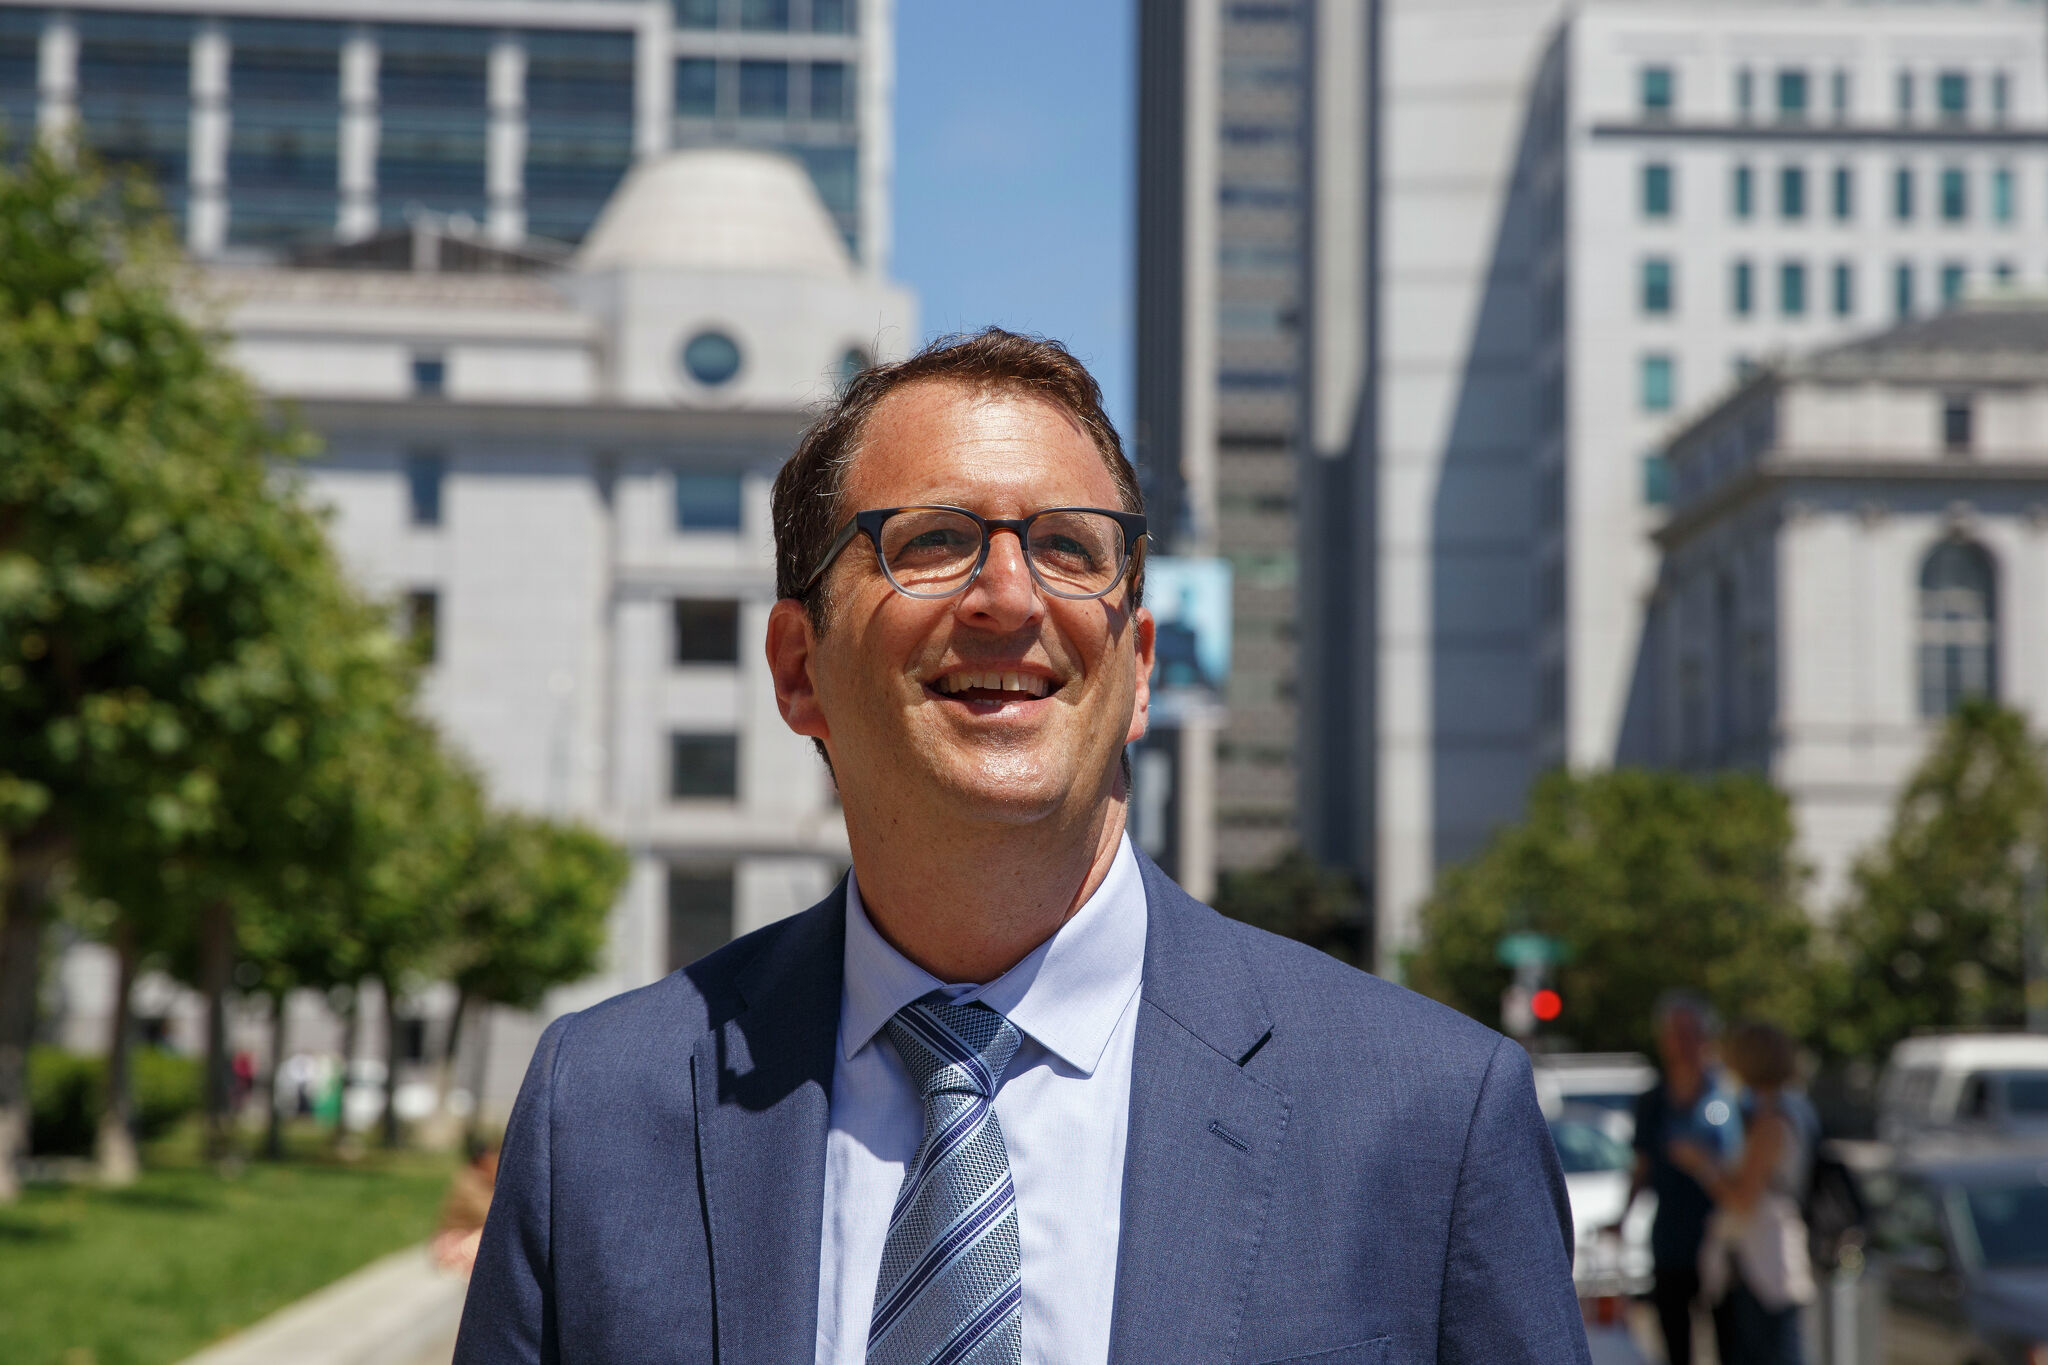 The battle over S.F. Supervisor Preston's housing record is heating up